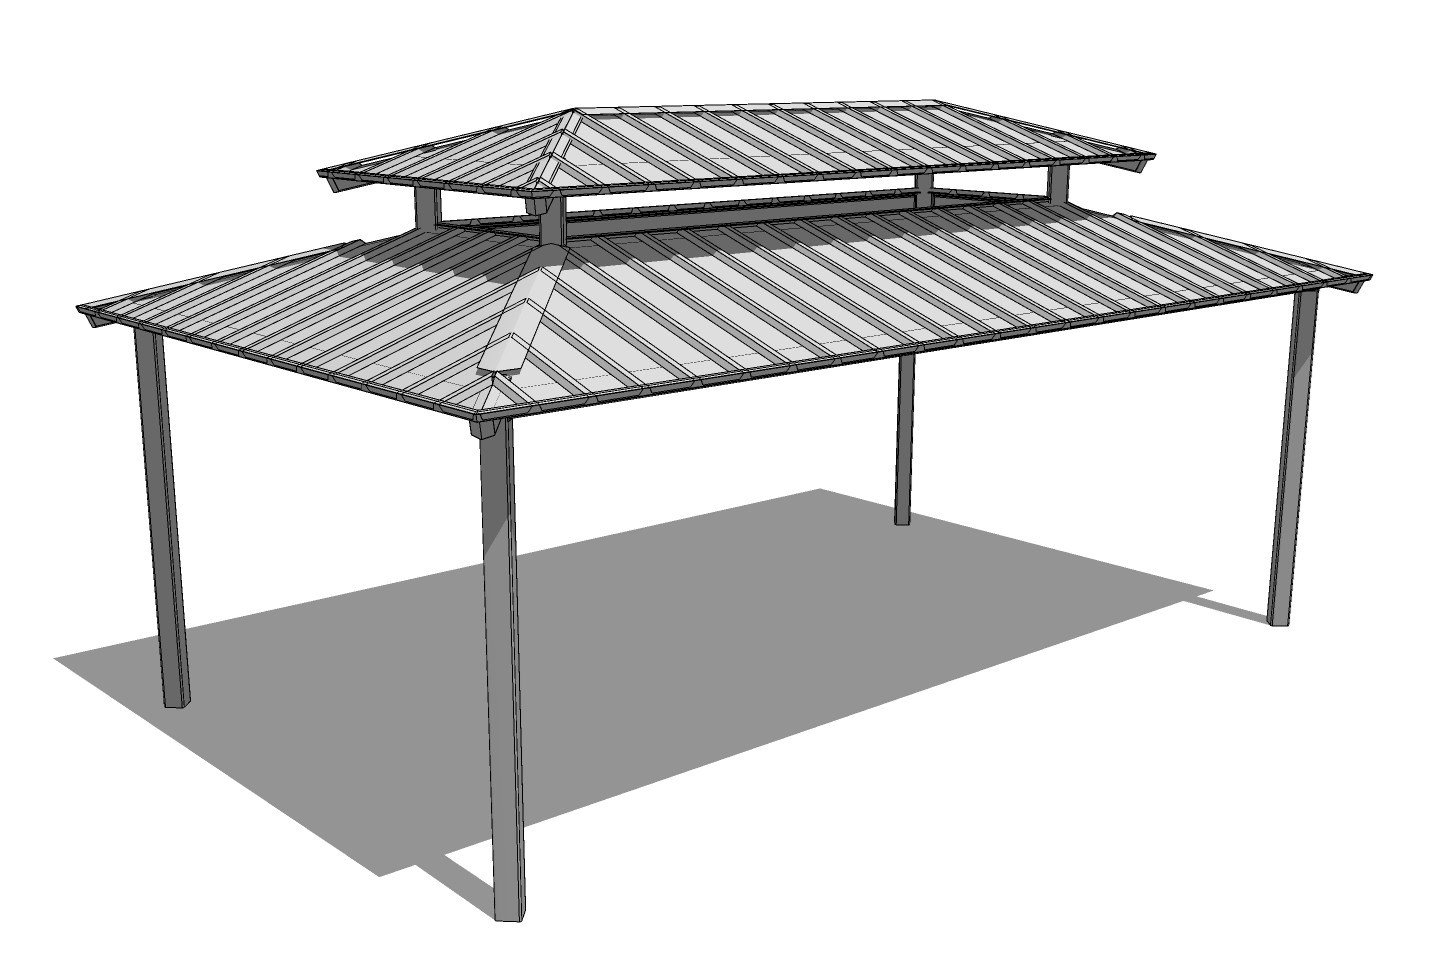 Steel Structure: Marquee – Clerestory, Hip Roof, Rectangular Shelter